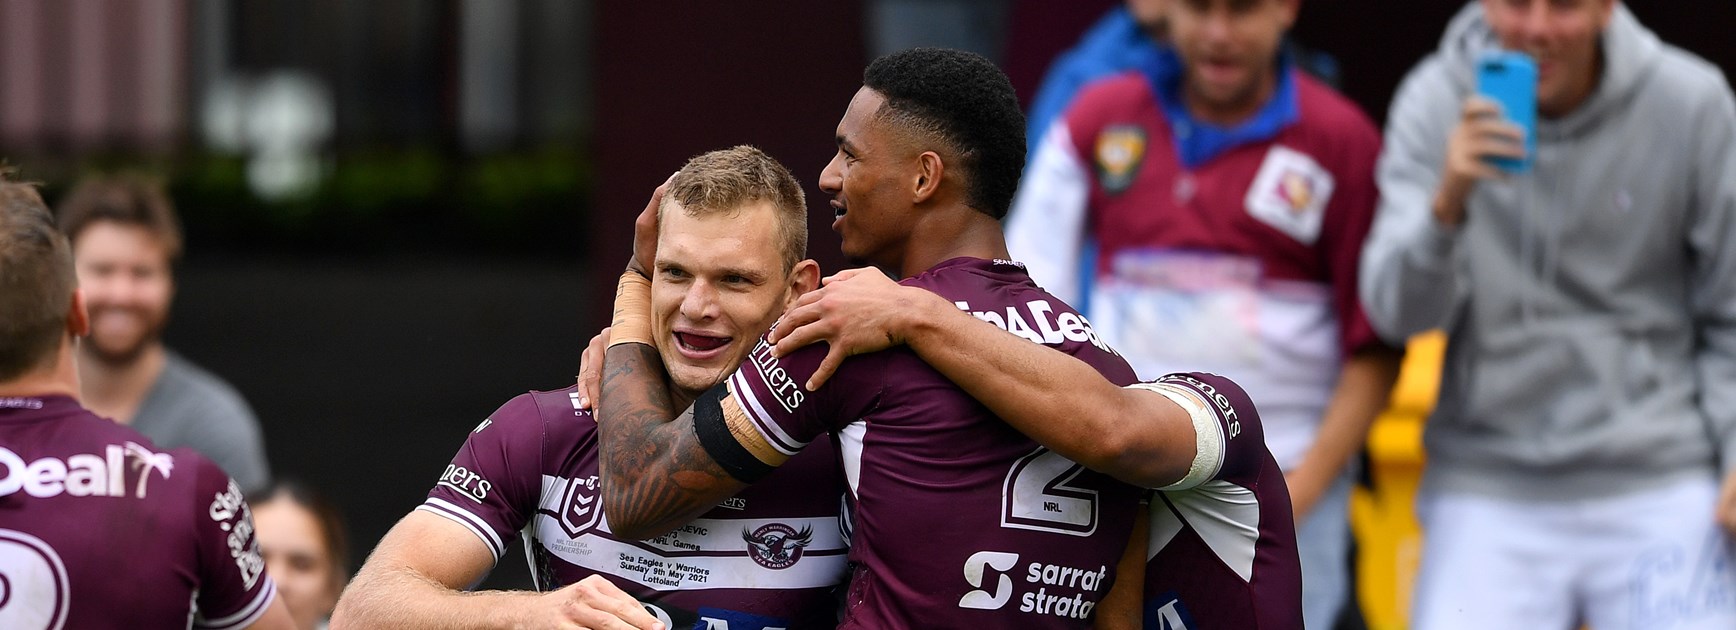 Stat Attack: Manly boast speed edge but Roosters have experience